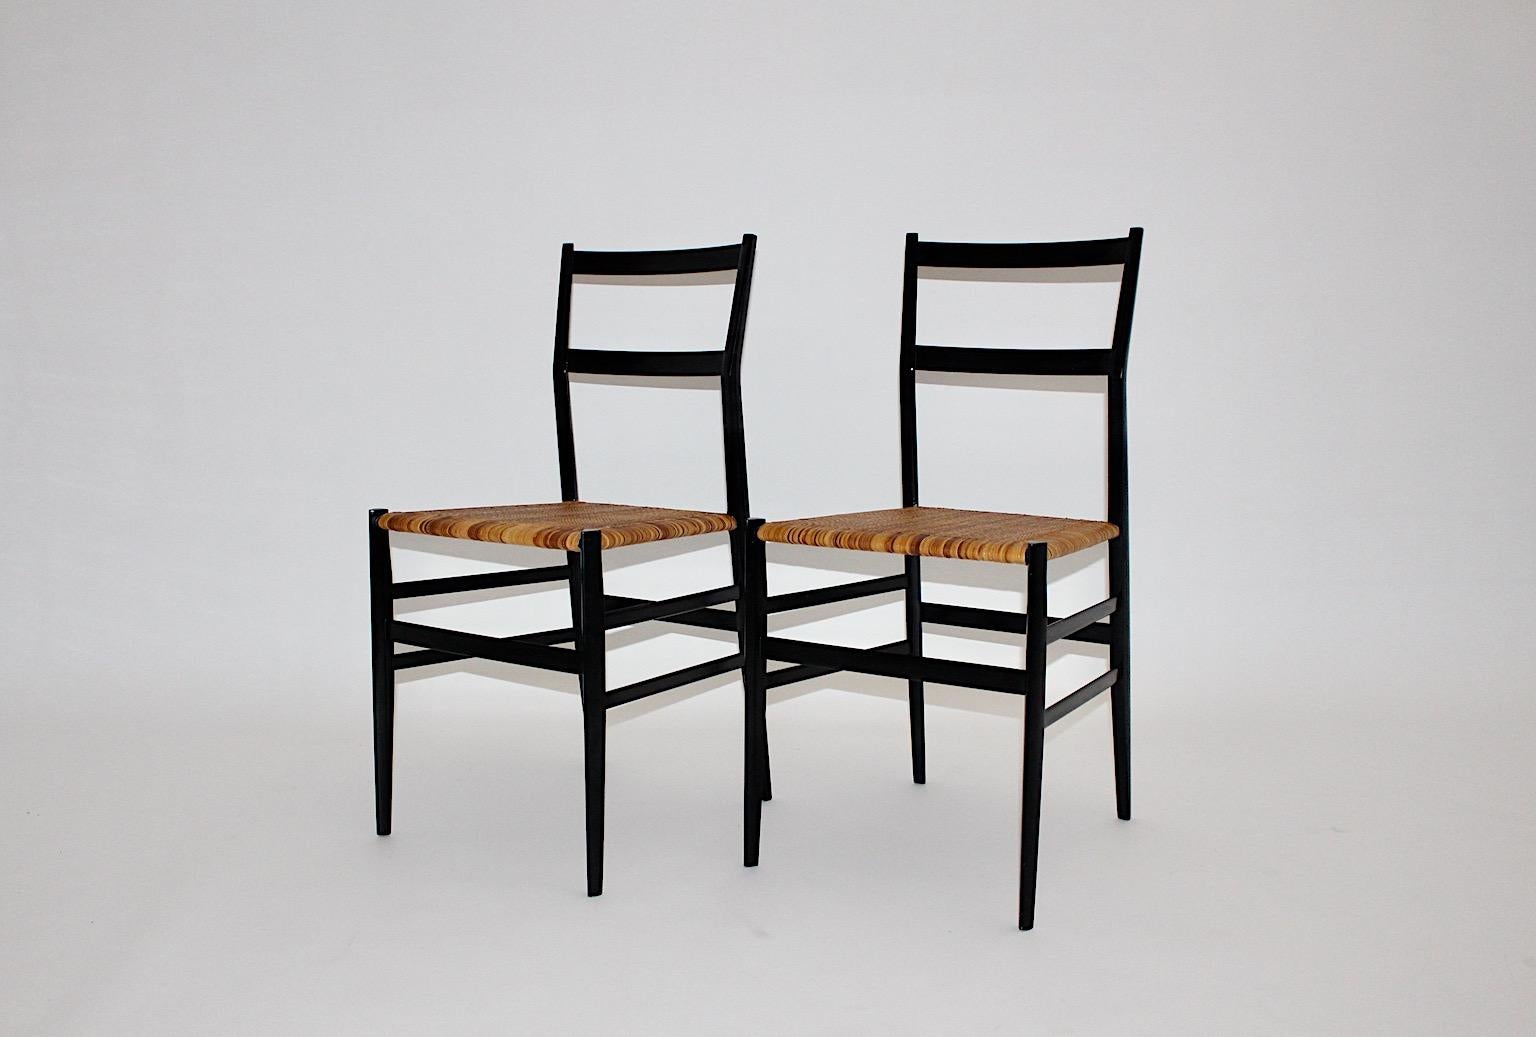 Modernist Vintage authentic pair or duo Superleggera Dining Chairs or Chairs from black lacquered wood and light brown cane mesh designed 1957 by Gio Ponti and manufactured 1980s for Cassina.
This elegant duo from dining chairs or chairs features a